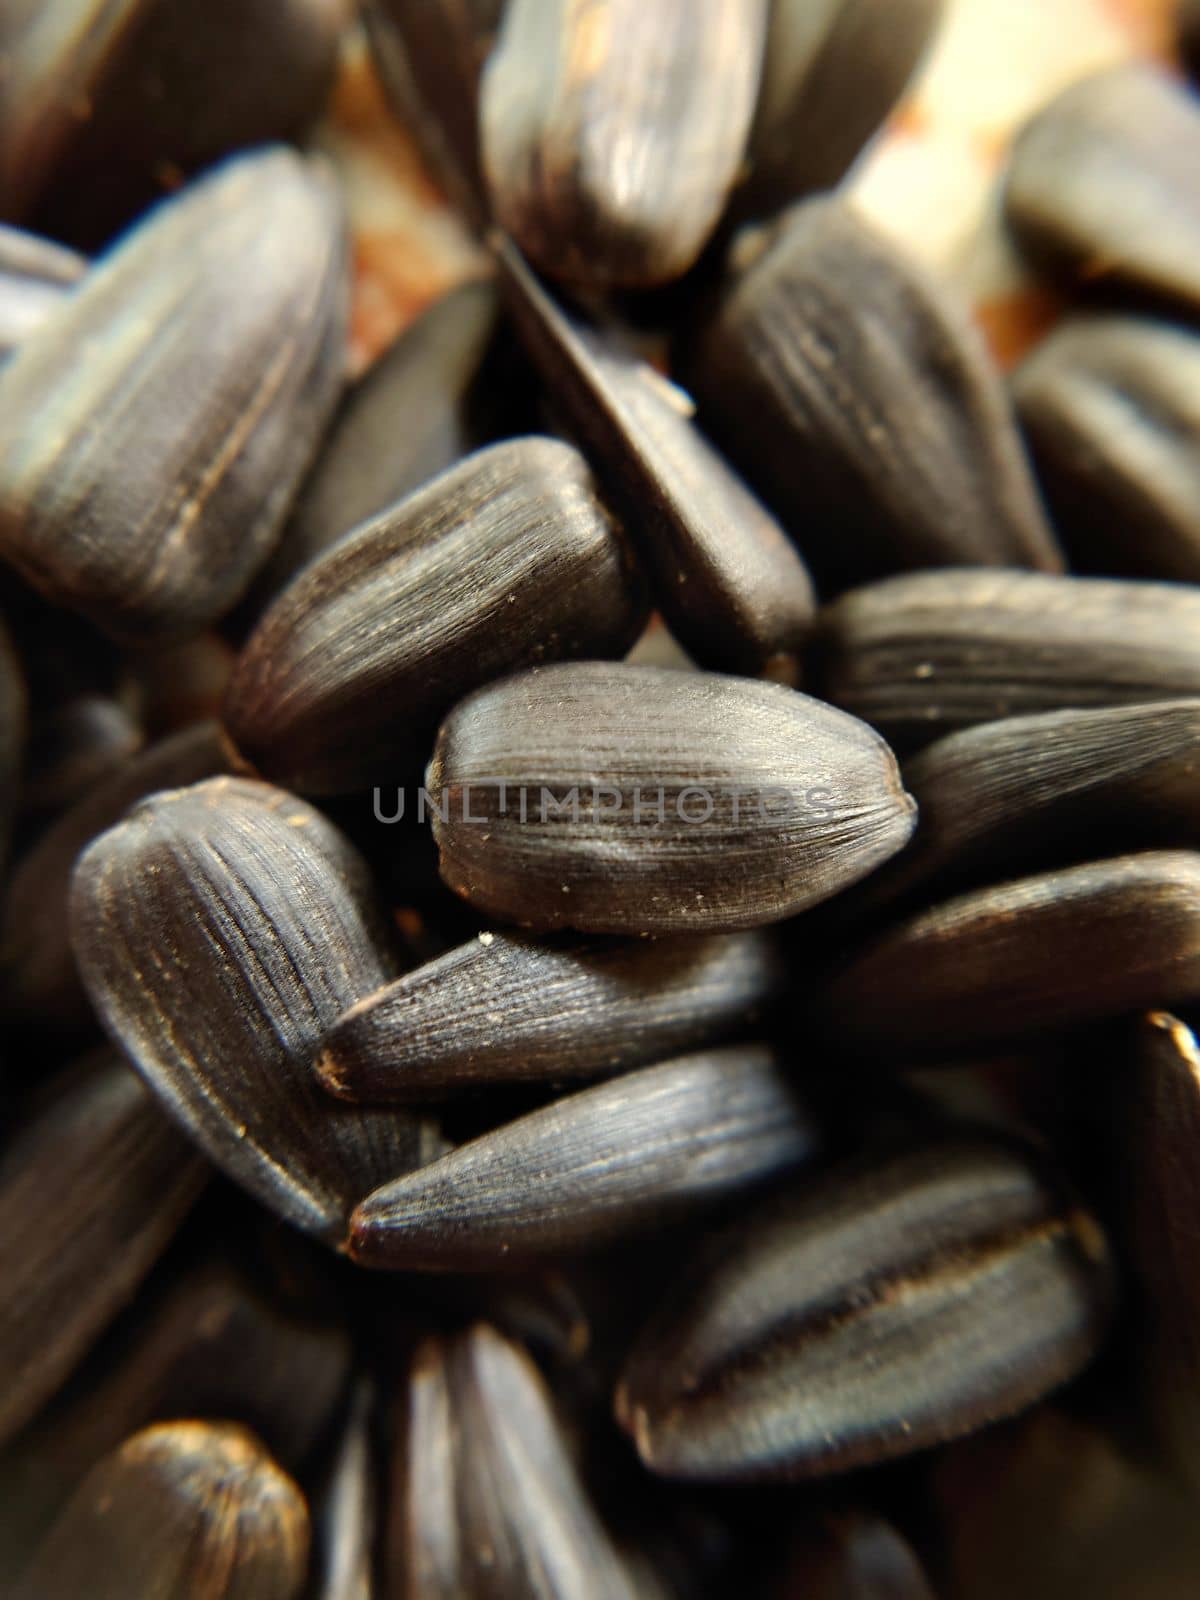 Roasted black sunflower seeds selective focus close-up by Mastak80